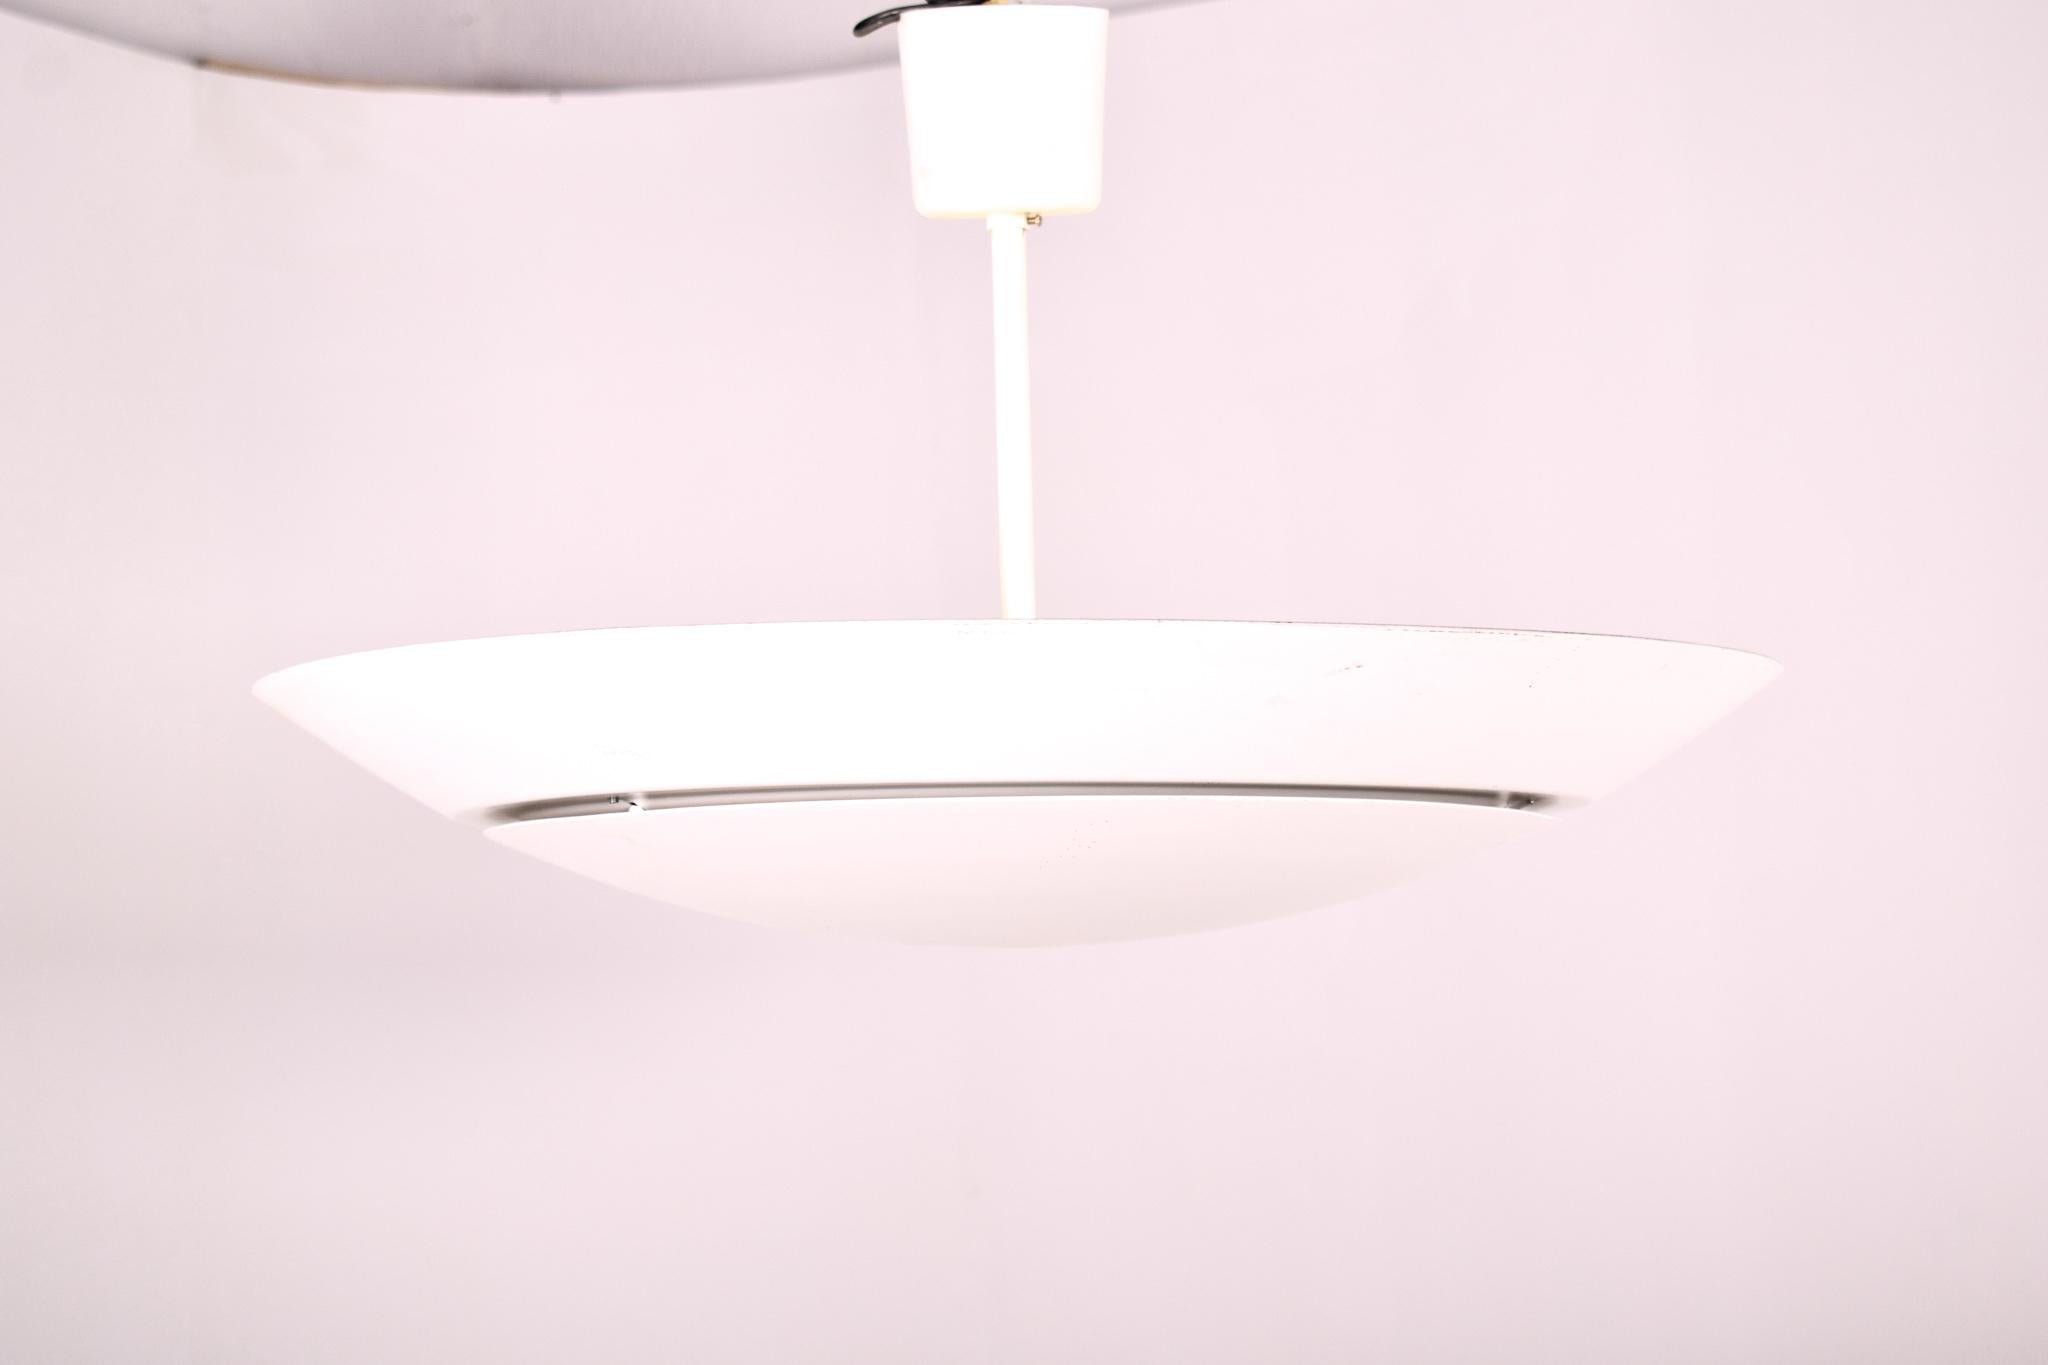 This pair of large Scandinavian mid-century modern ceiling lamps exudes the sleek and functional design ethos that is a hallmark of 20th-century European design. Constructed from white lacquered aluminum, these lamps embody the minimalist aesthetic,